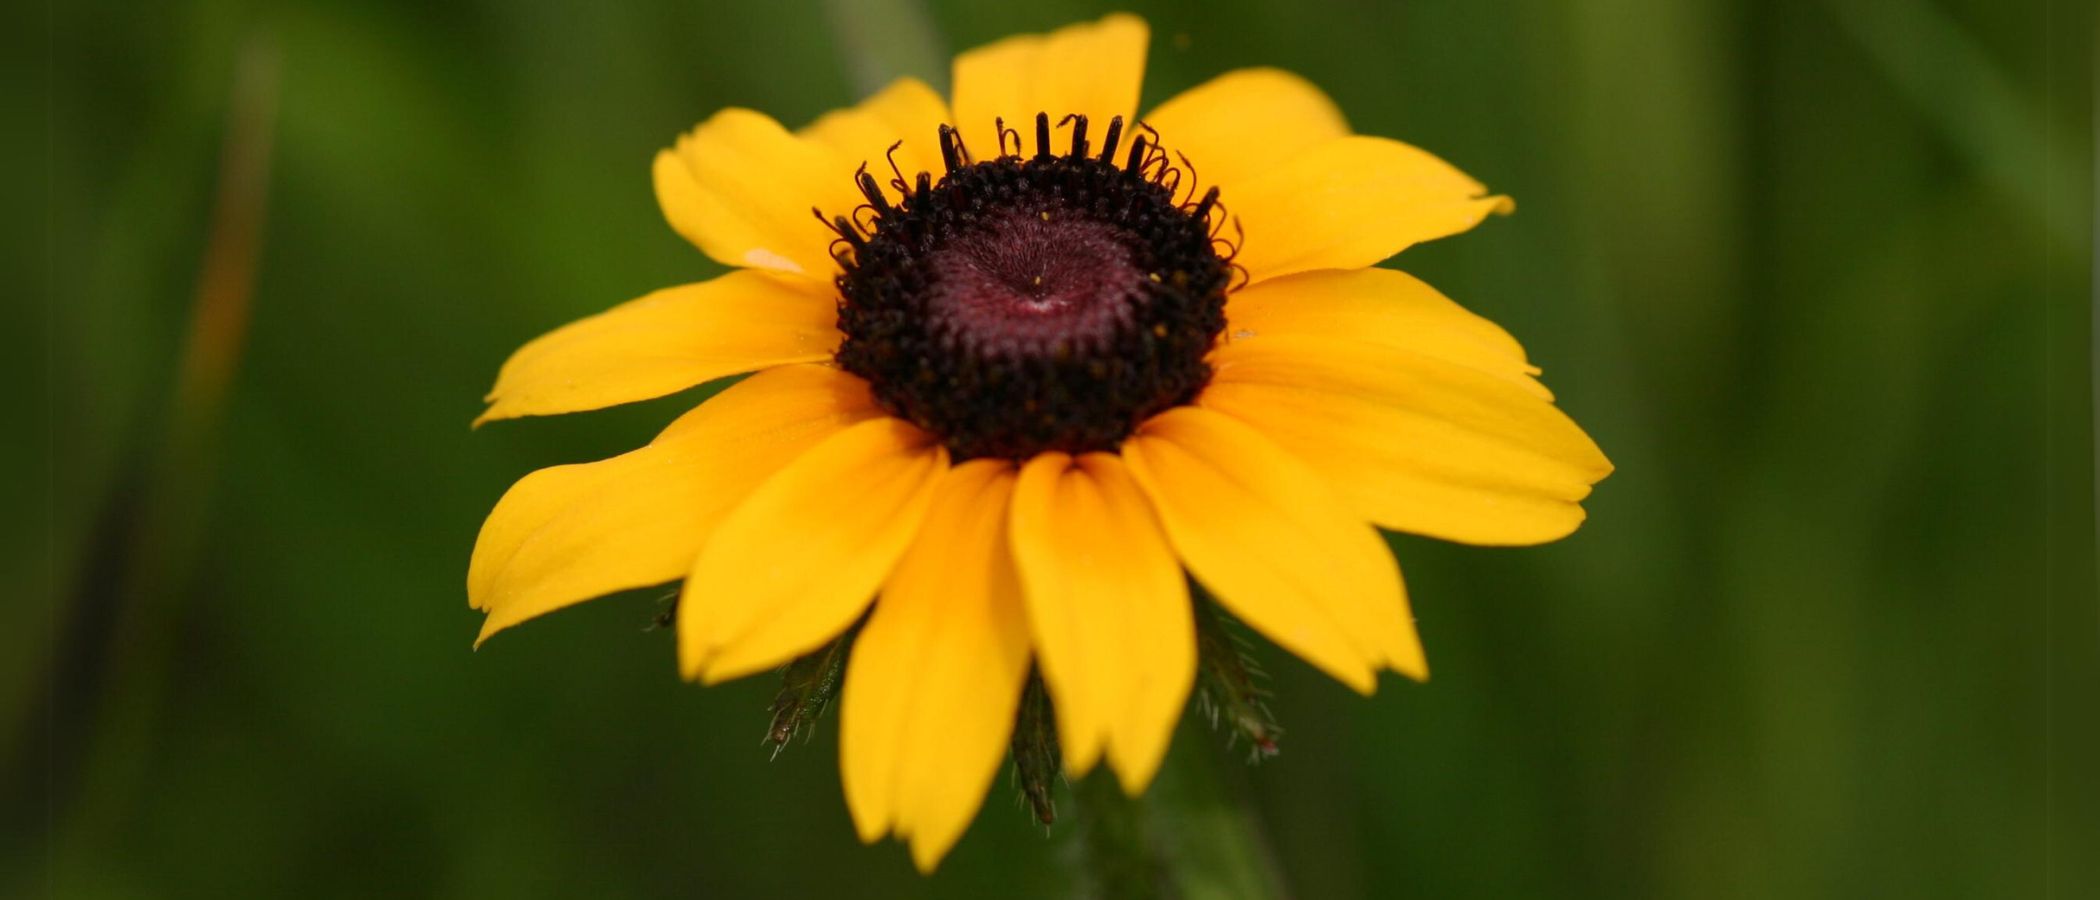 Close-up photograph of a yellow petaled flower with a dark centre. Black-eyed Susan.